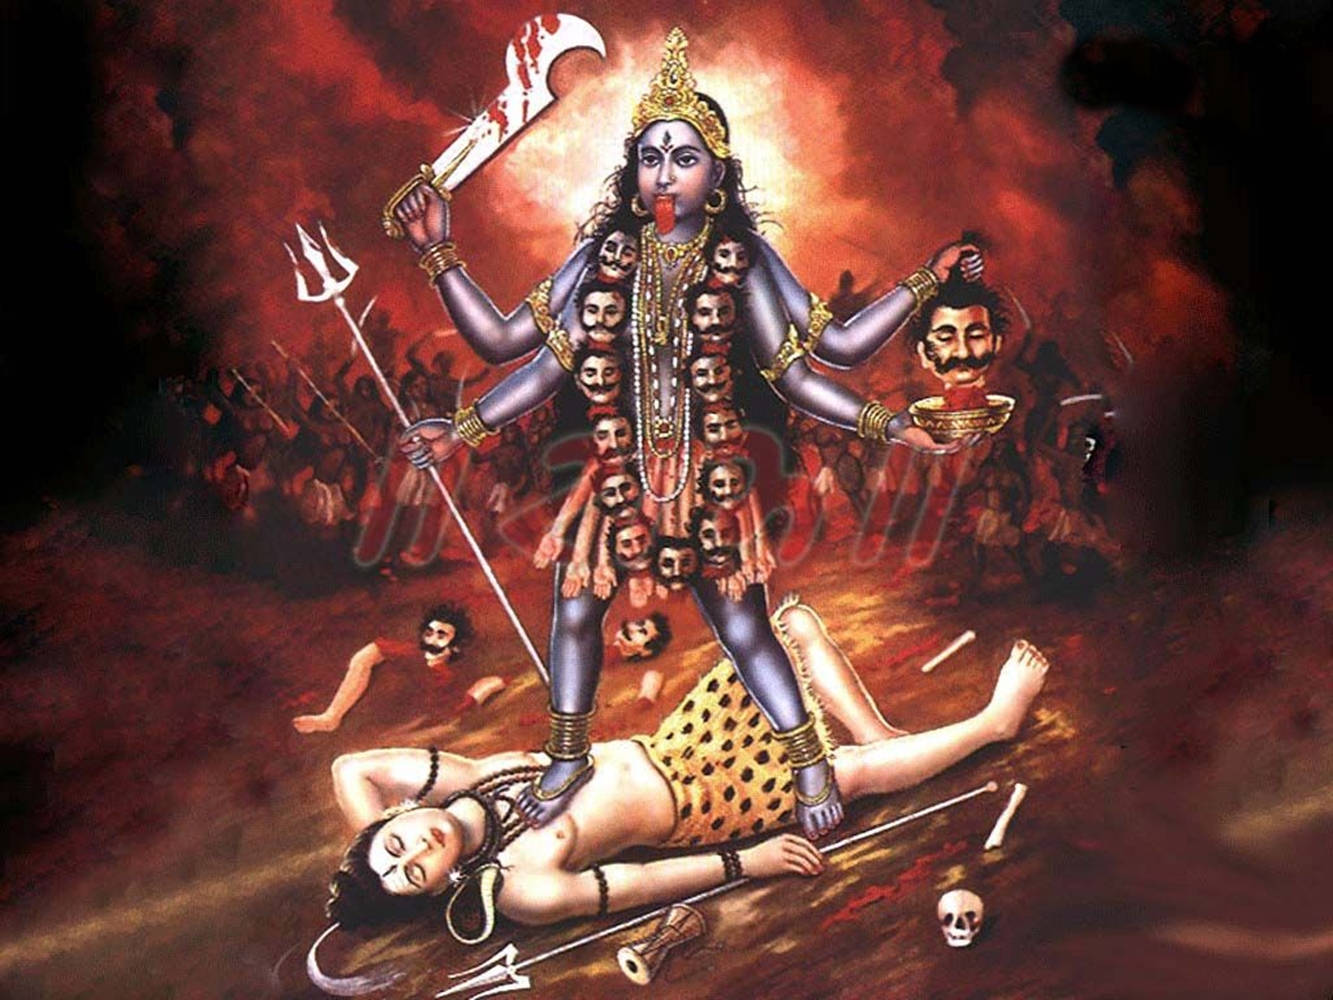 Maa Kali On Shiva Red Aesthetic With People Wallpaper